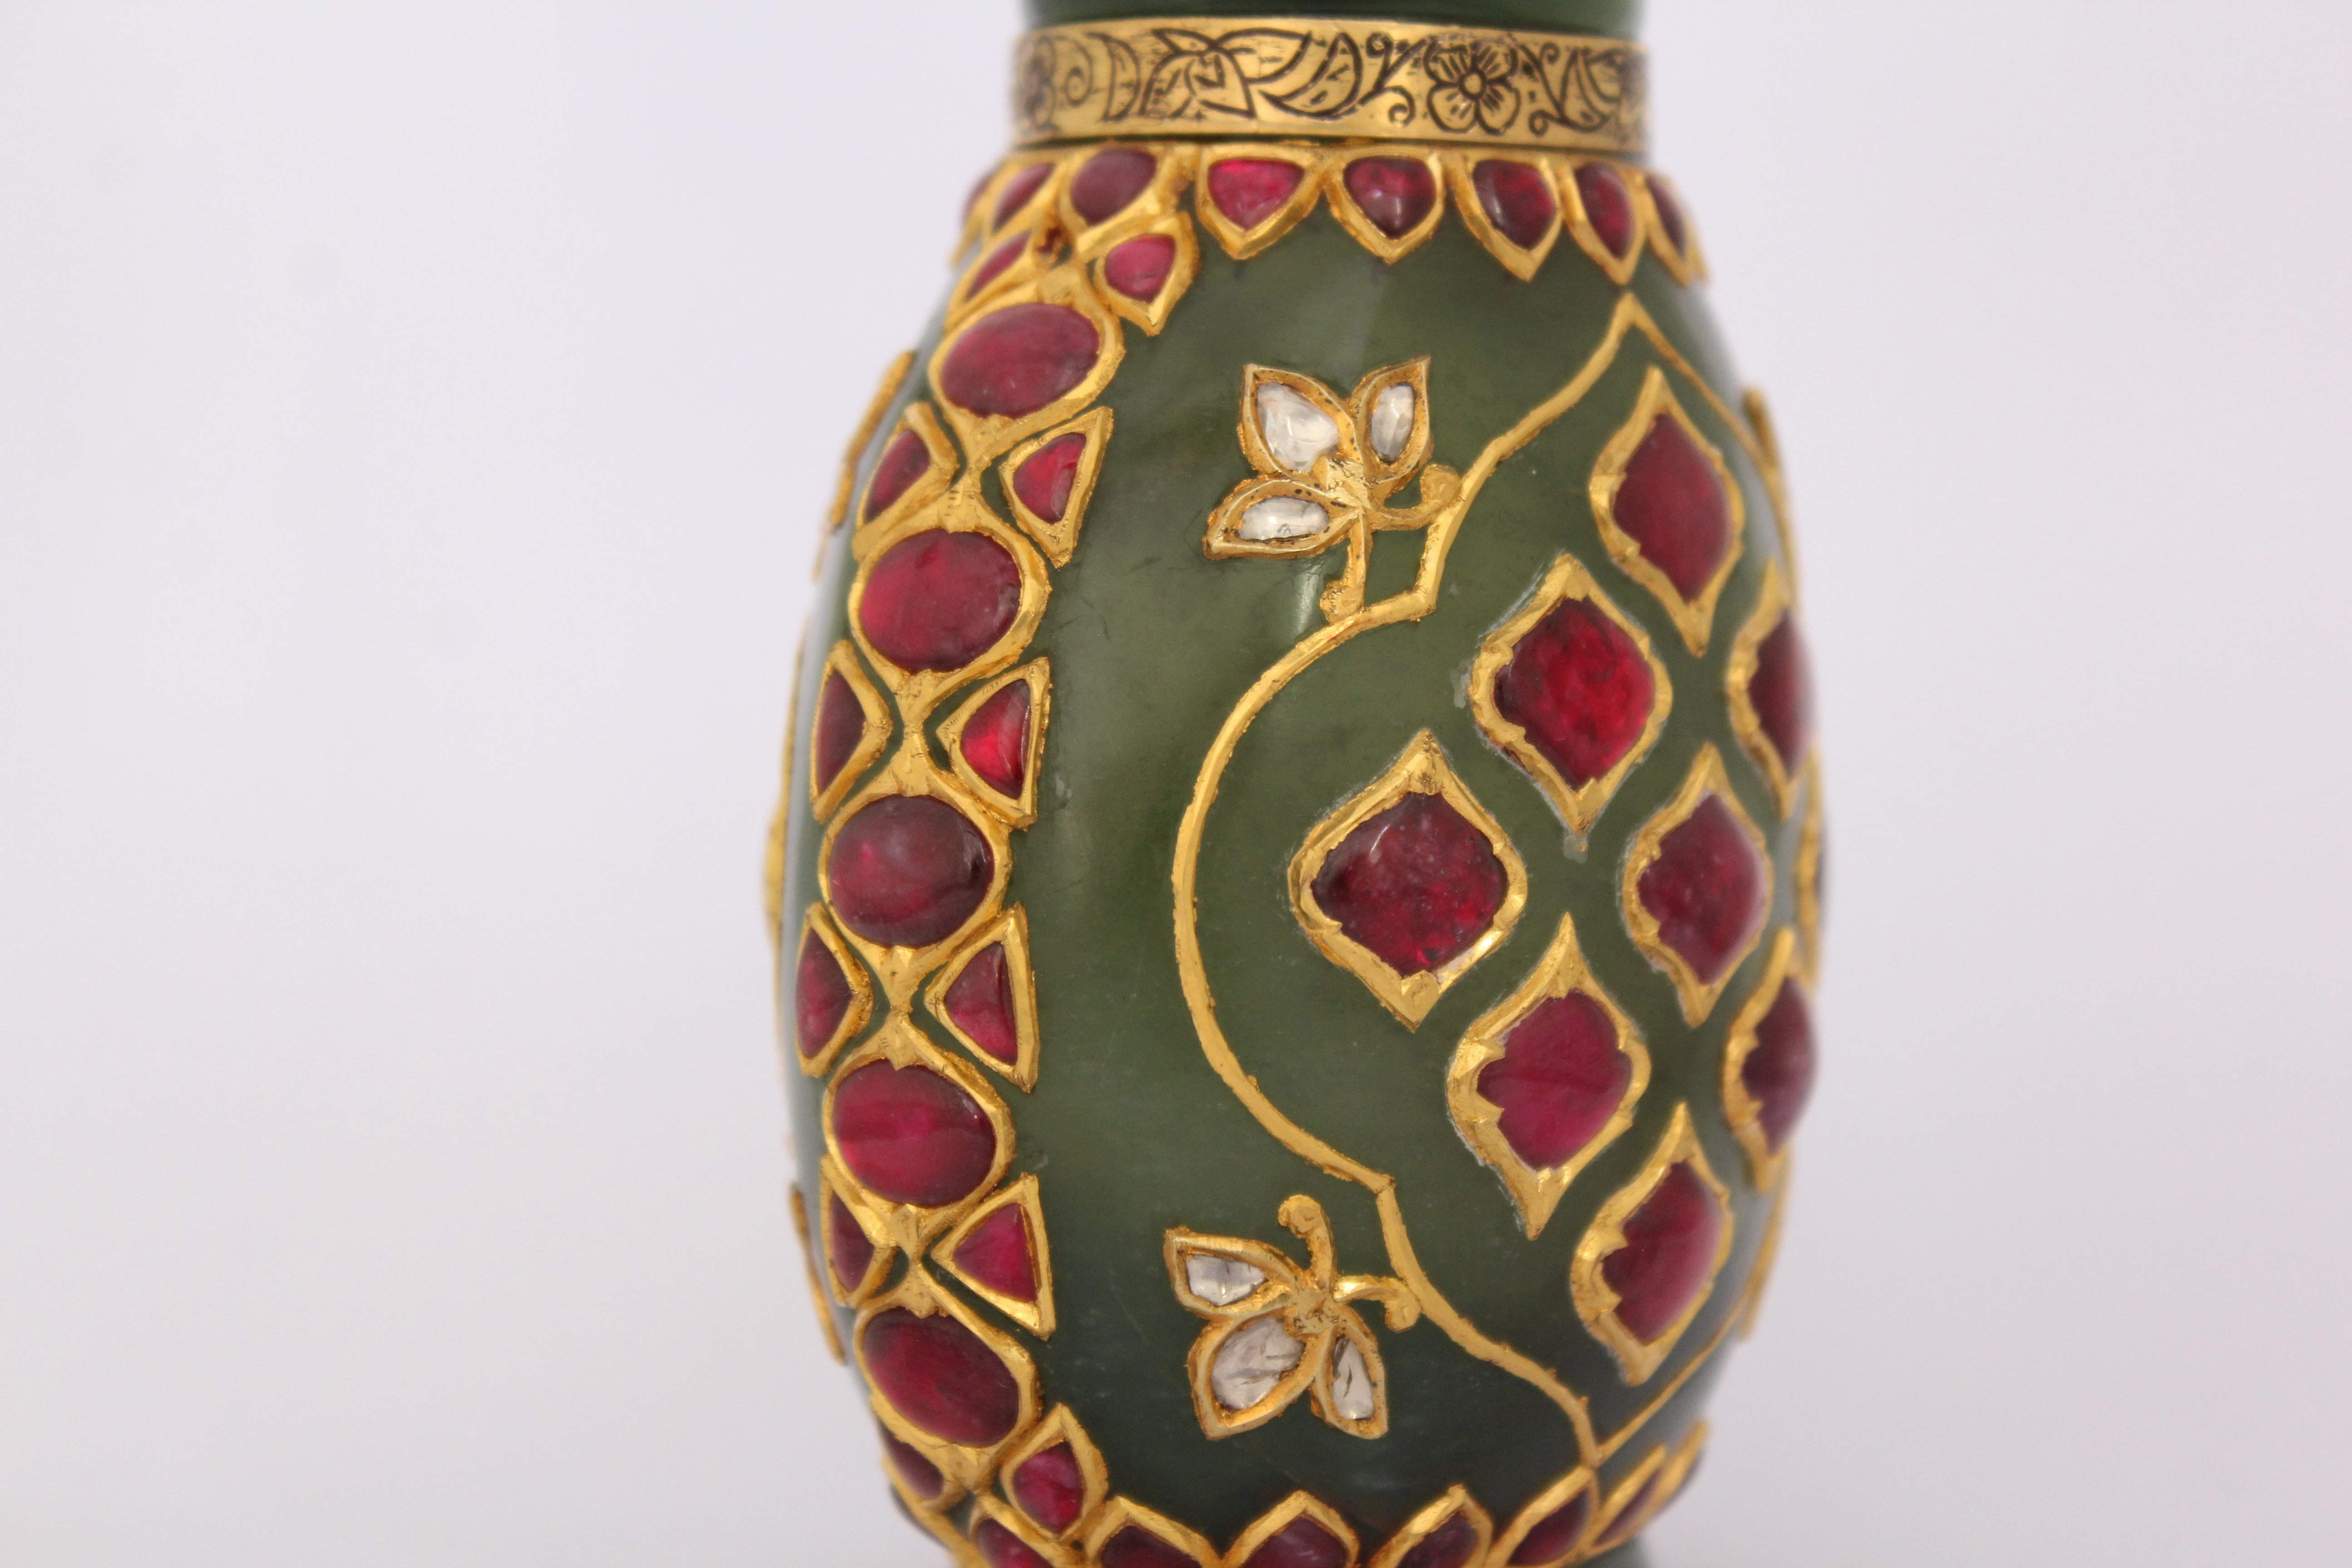 This elegant rare whiskey flask is made from one single stone and inlaid in gold, rising from short flaring foot through rounded body to slightly flaring cylindrical rim, with simple cylindrical spout, the body elegantly engraved with a 24K purity